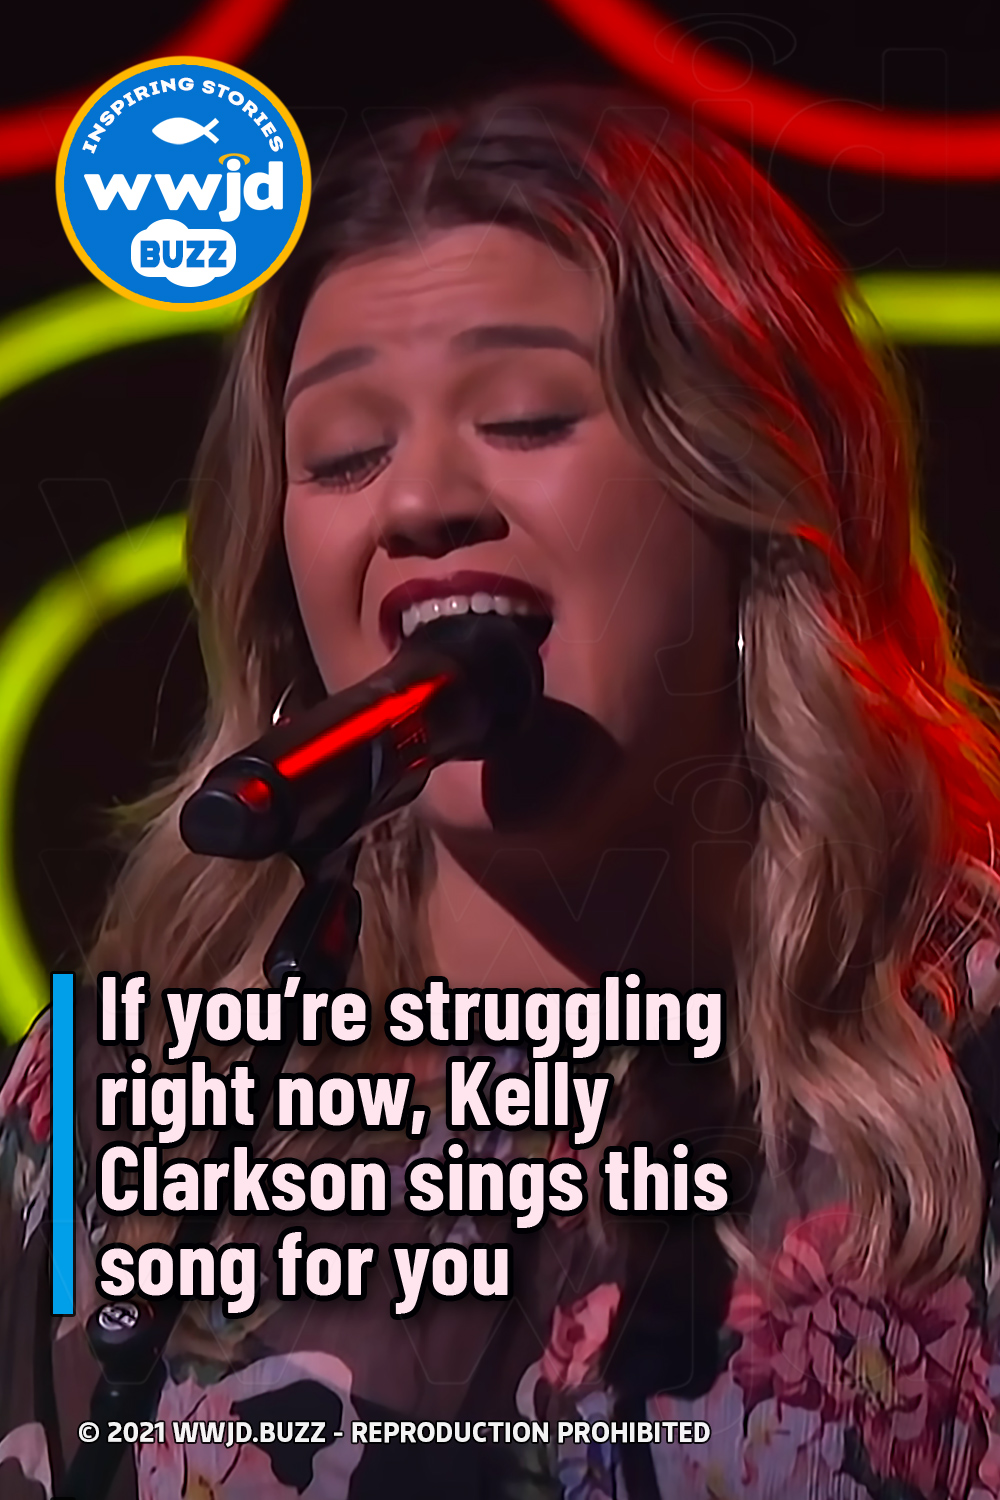 If you’re struggling right now, Kelly Clarkson sings this song for you